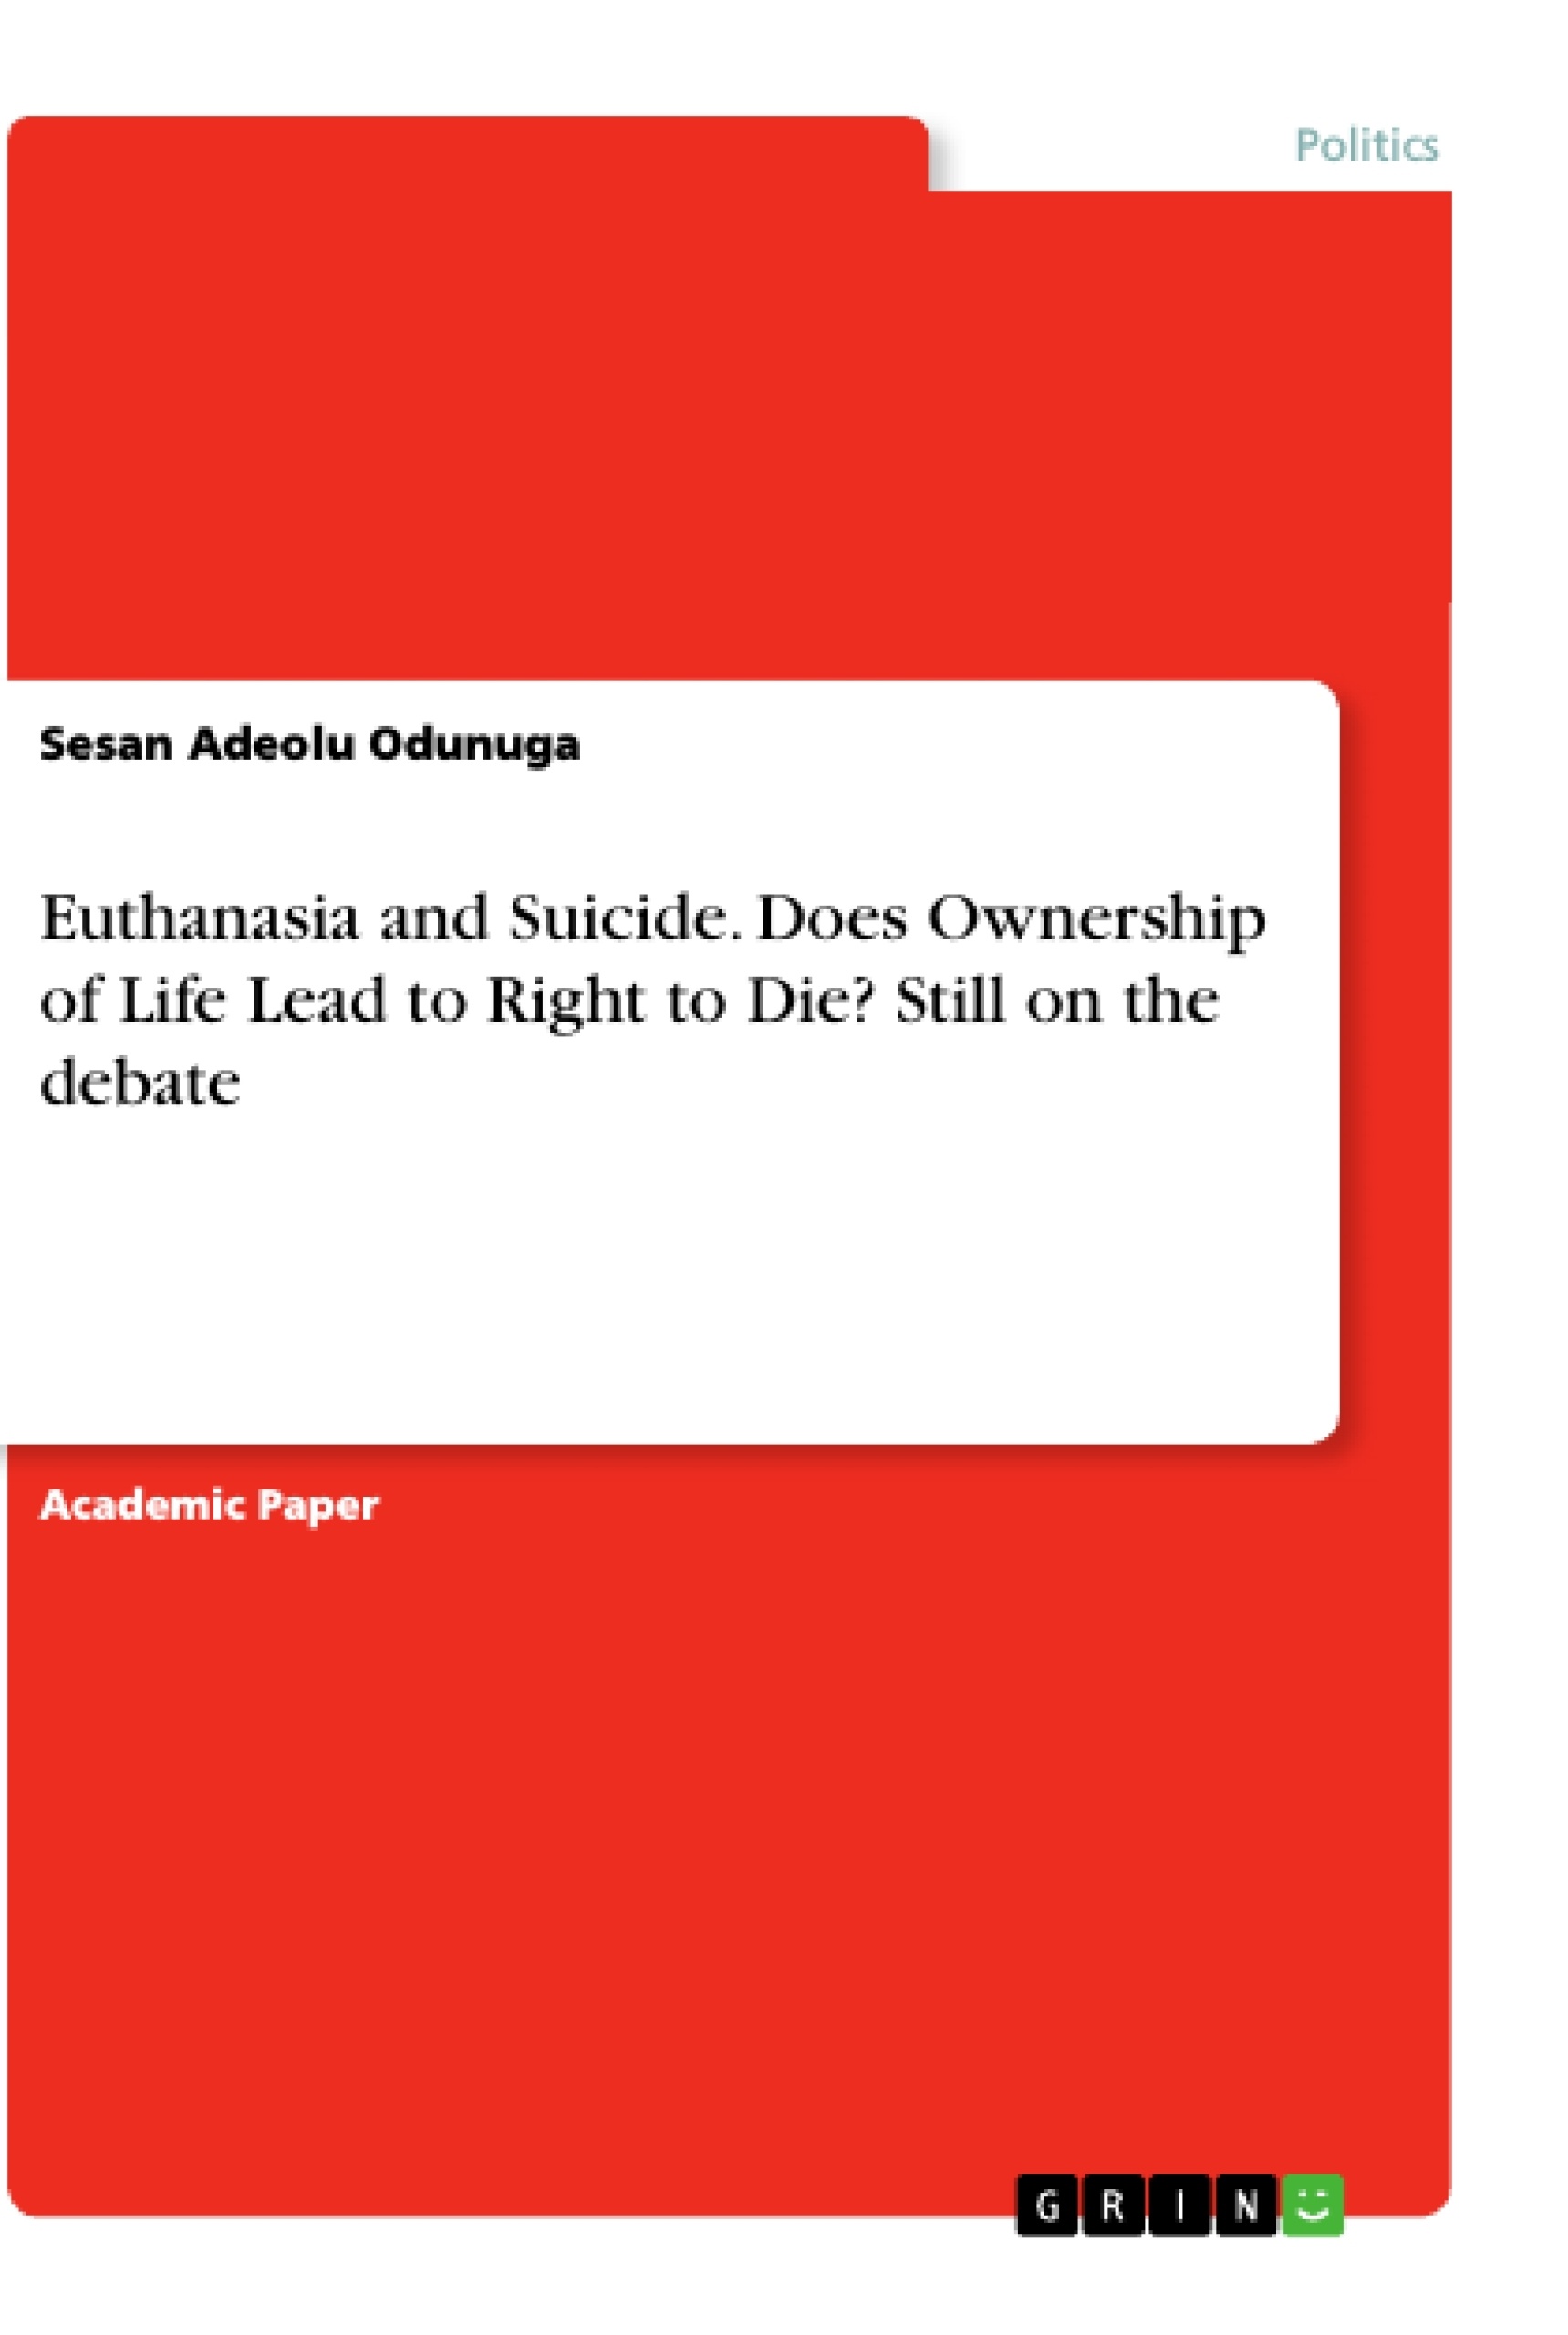 Title: Euthanasia and Suicide. Does Ownership of Life Lead to Right to Die? Still on the debate